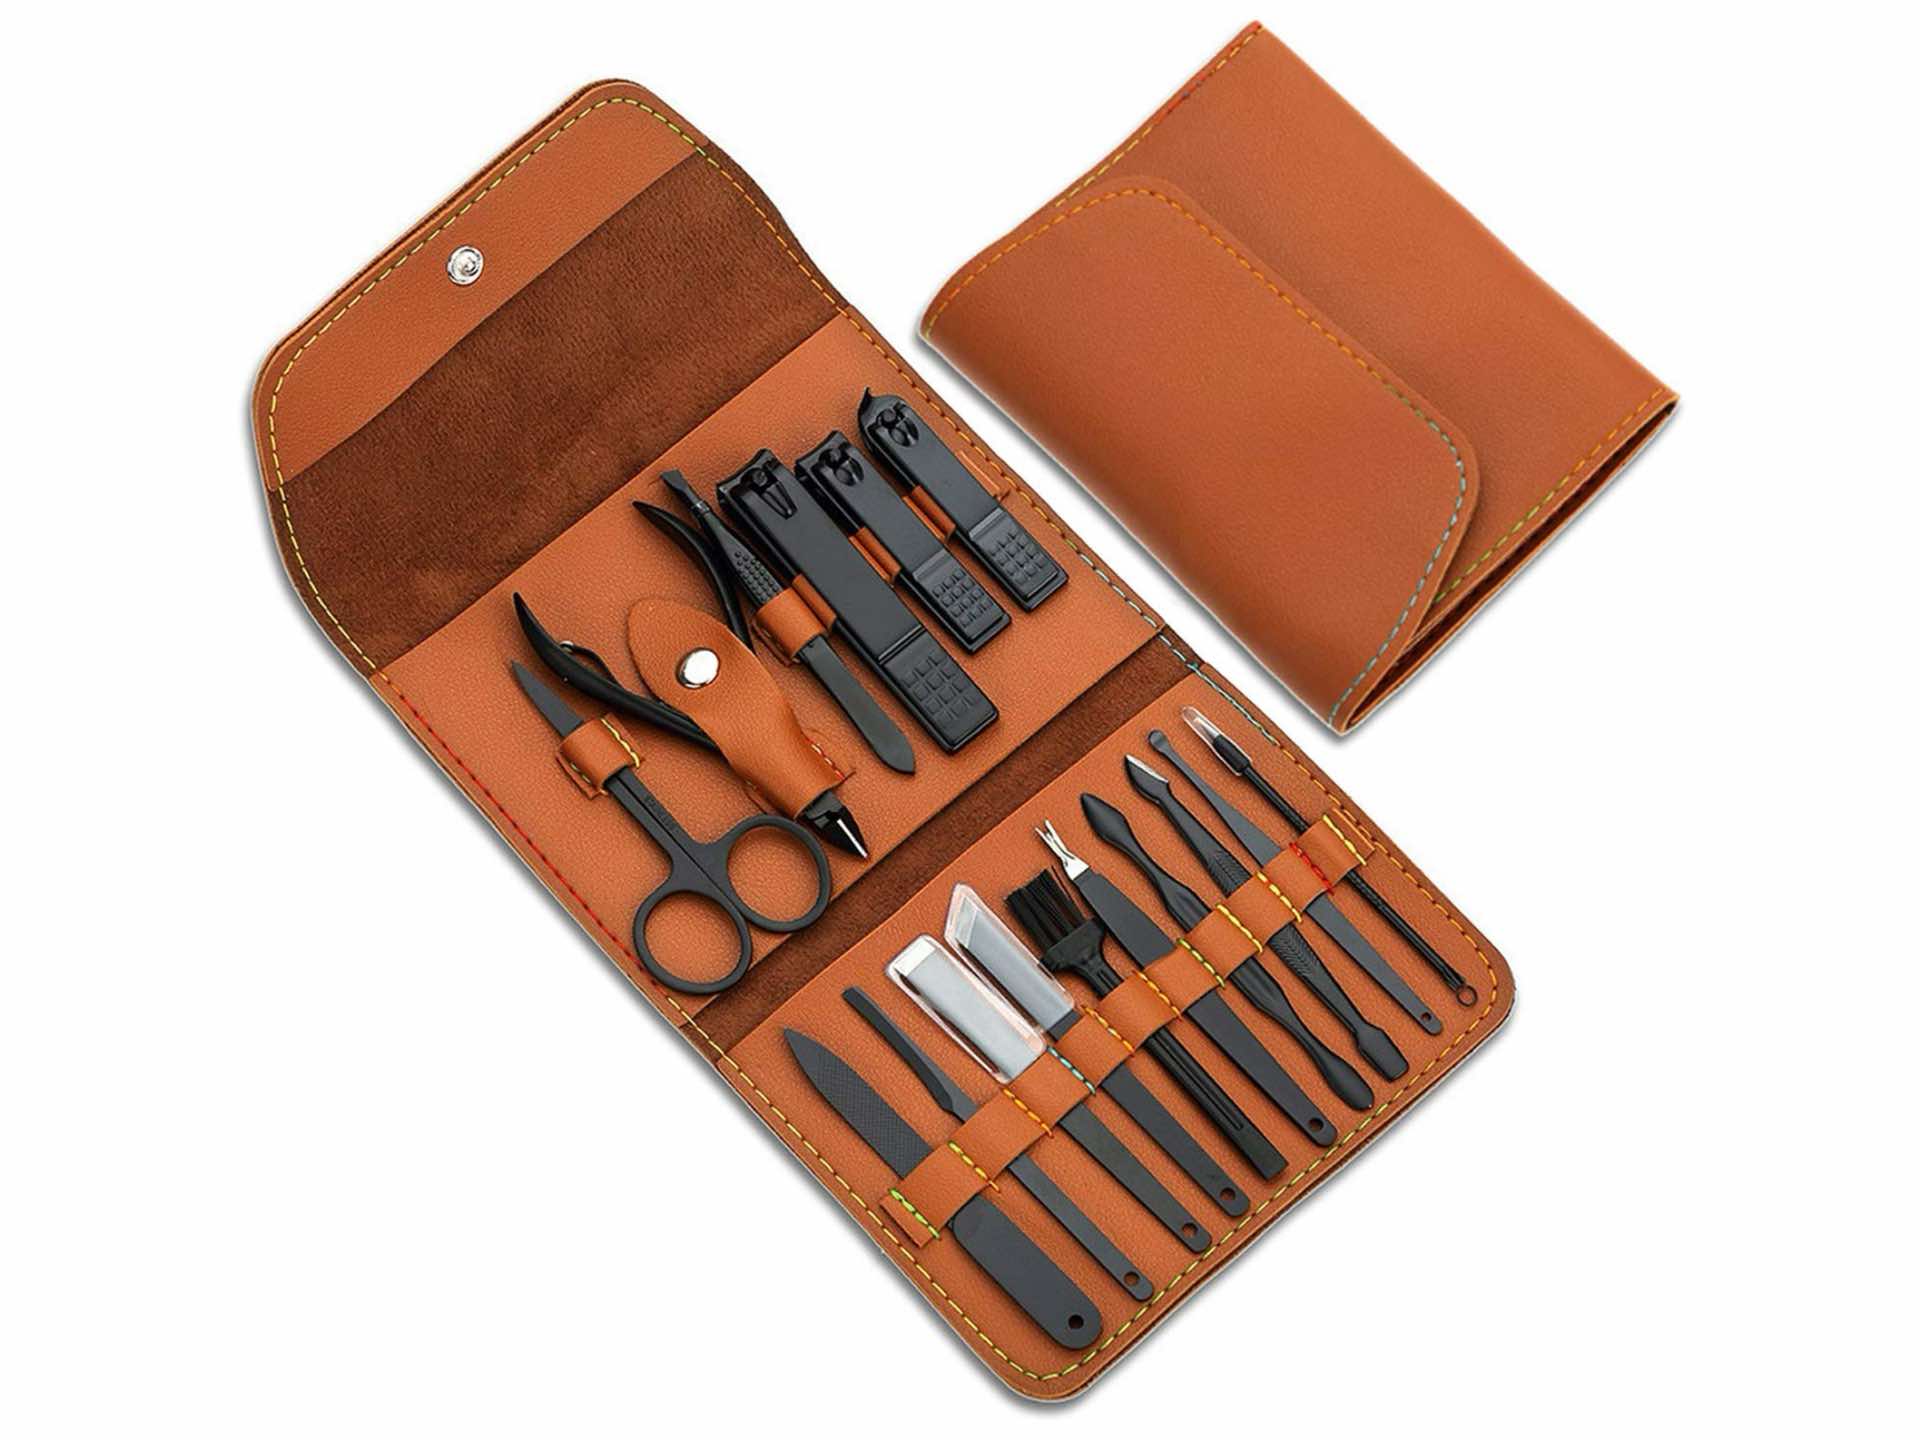 stainless-steel-manicure-set-with-pu-leather-pouch